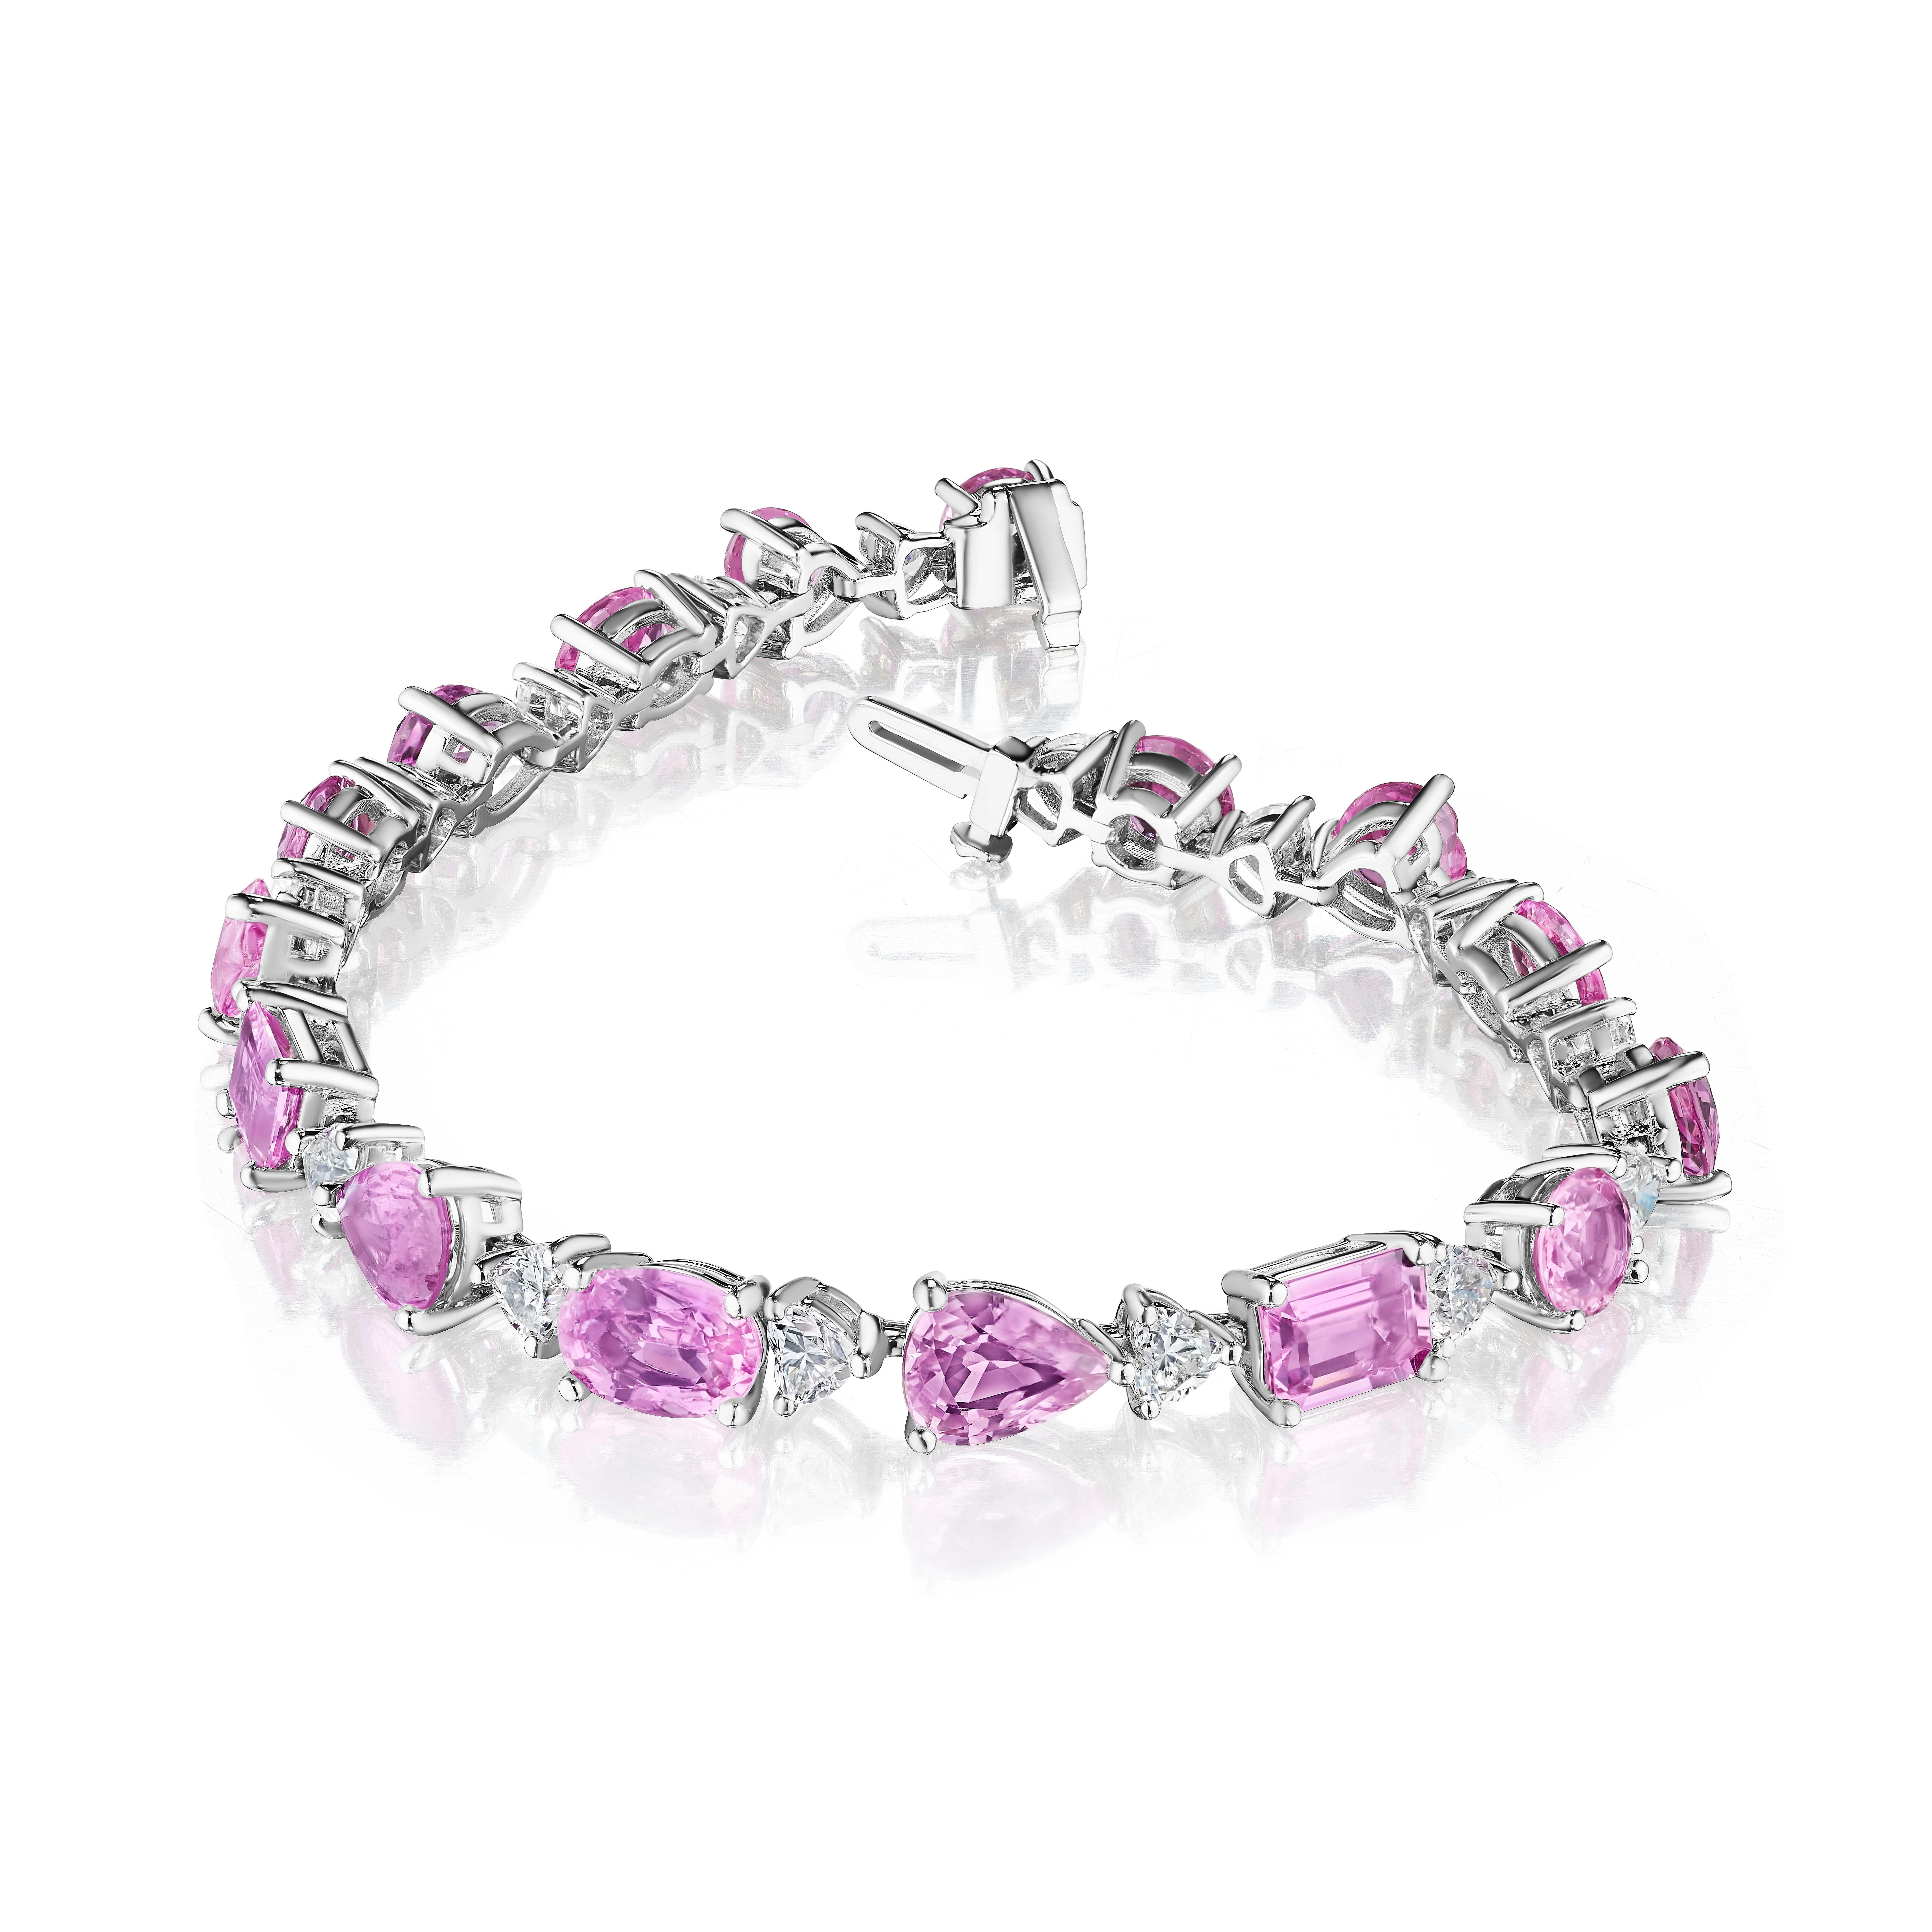 Modern 19.07ct Mixed Shape Pink Sapphire & Diamond Bracelet in 18KT White Gold For Sale